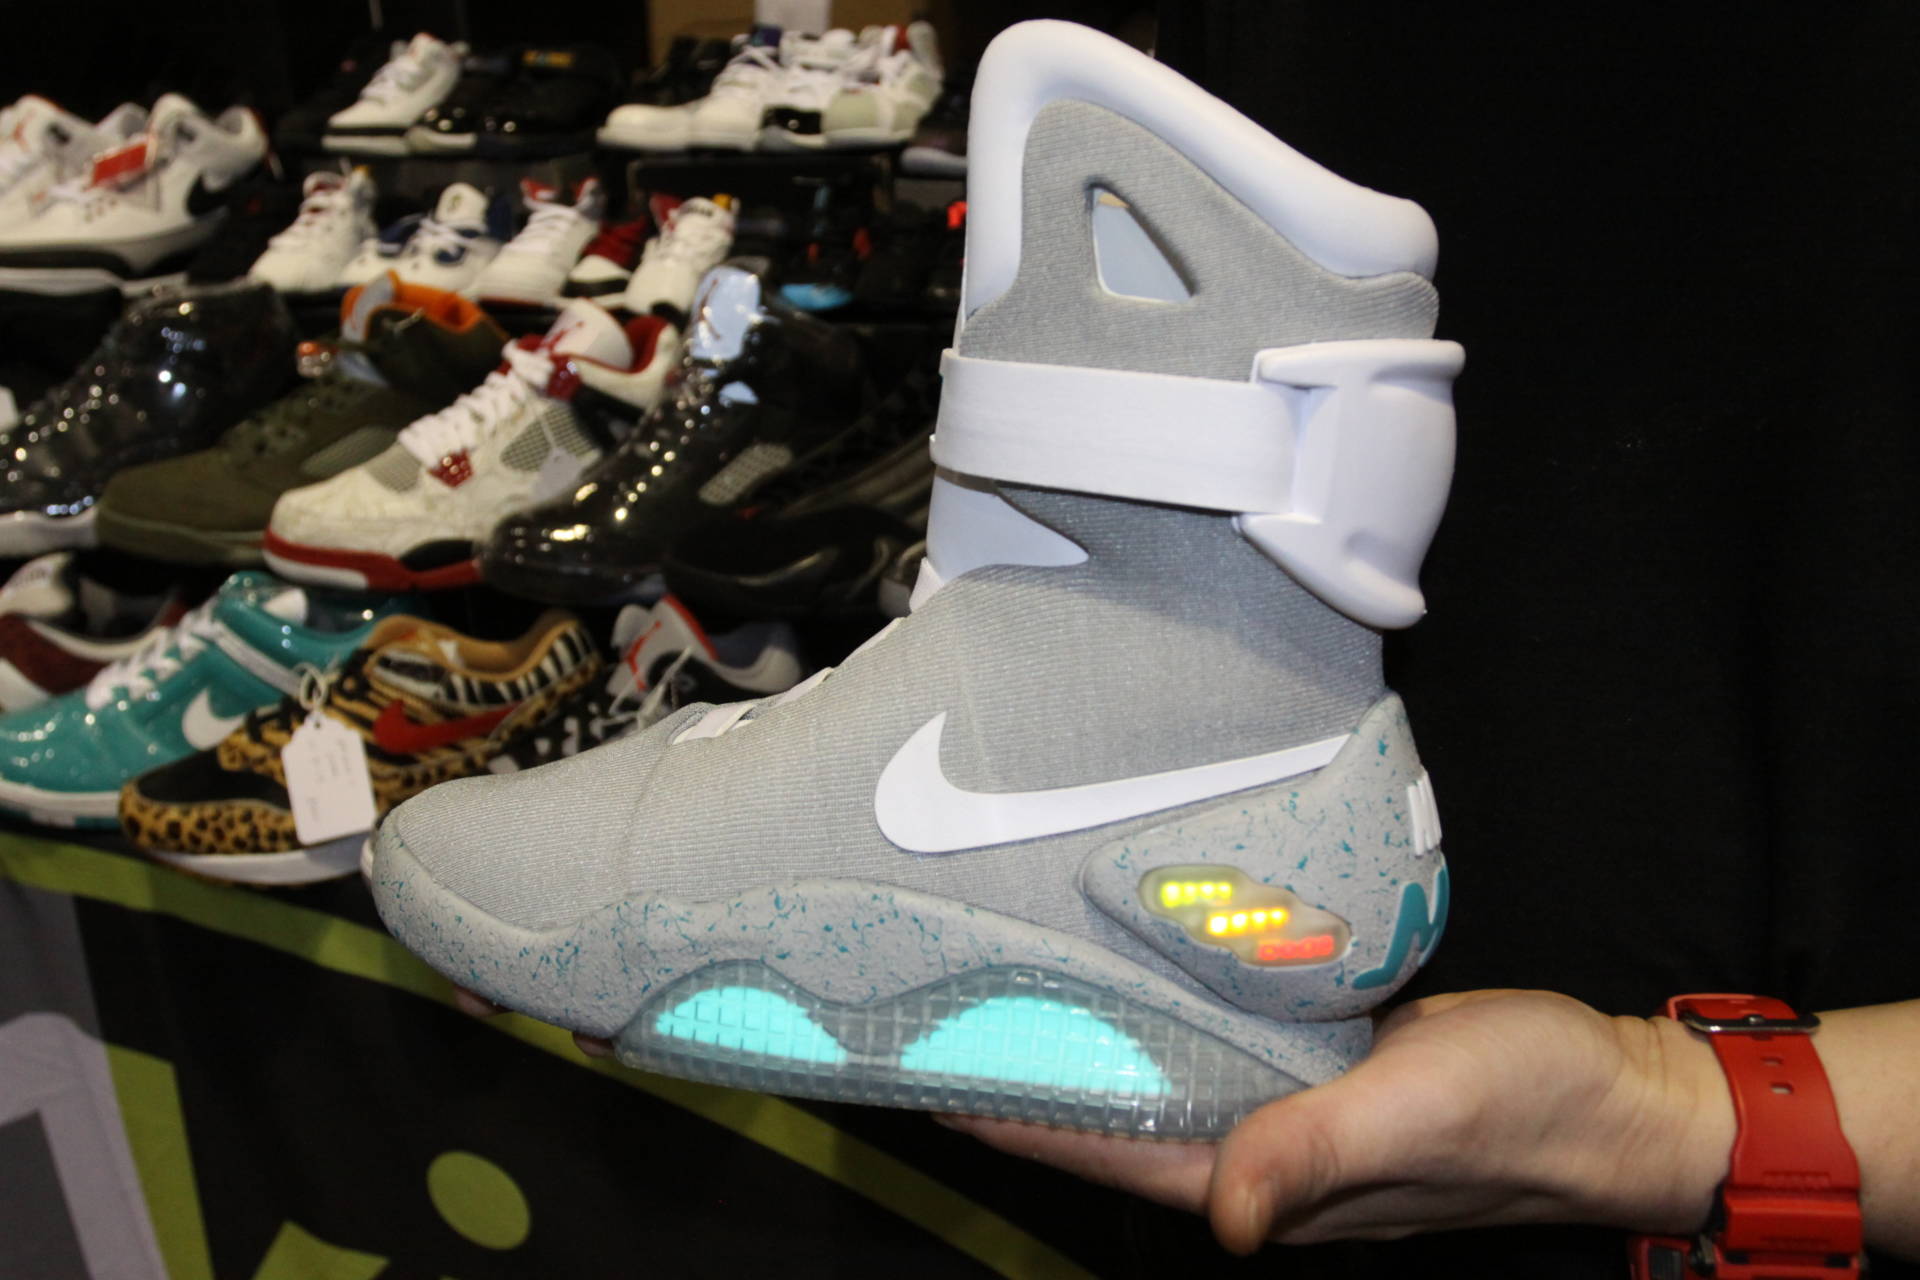 This pair of “Marty McFly” Air Mags, named after the Back to the Future character, is priced at $11,000.